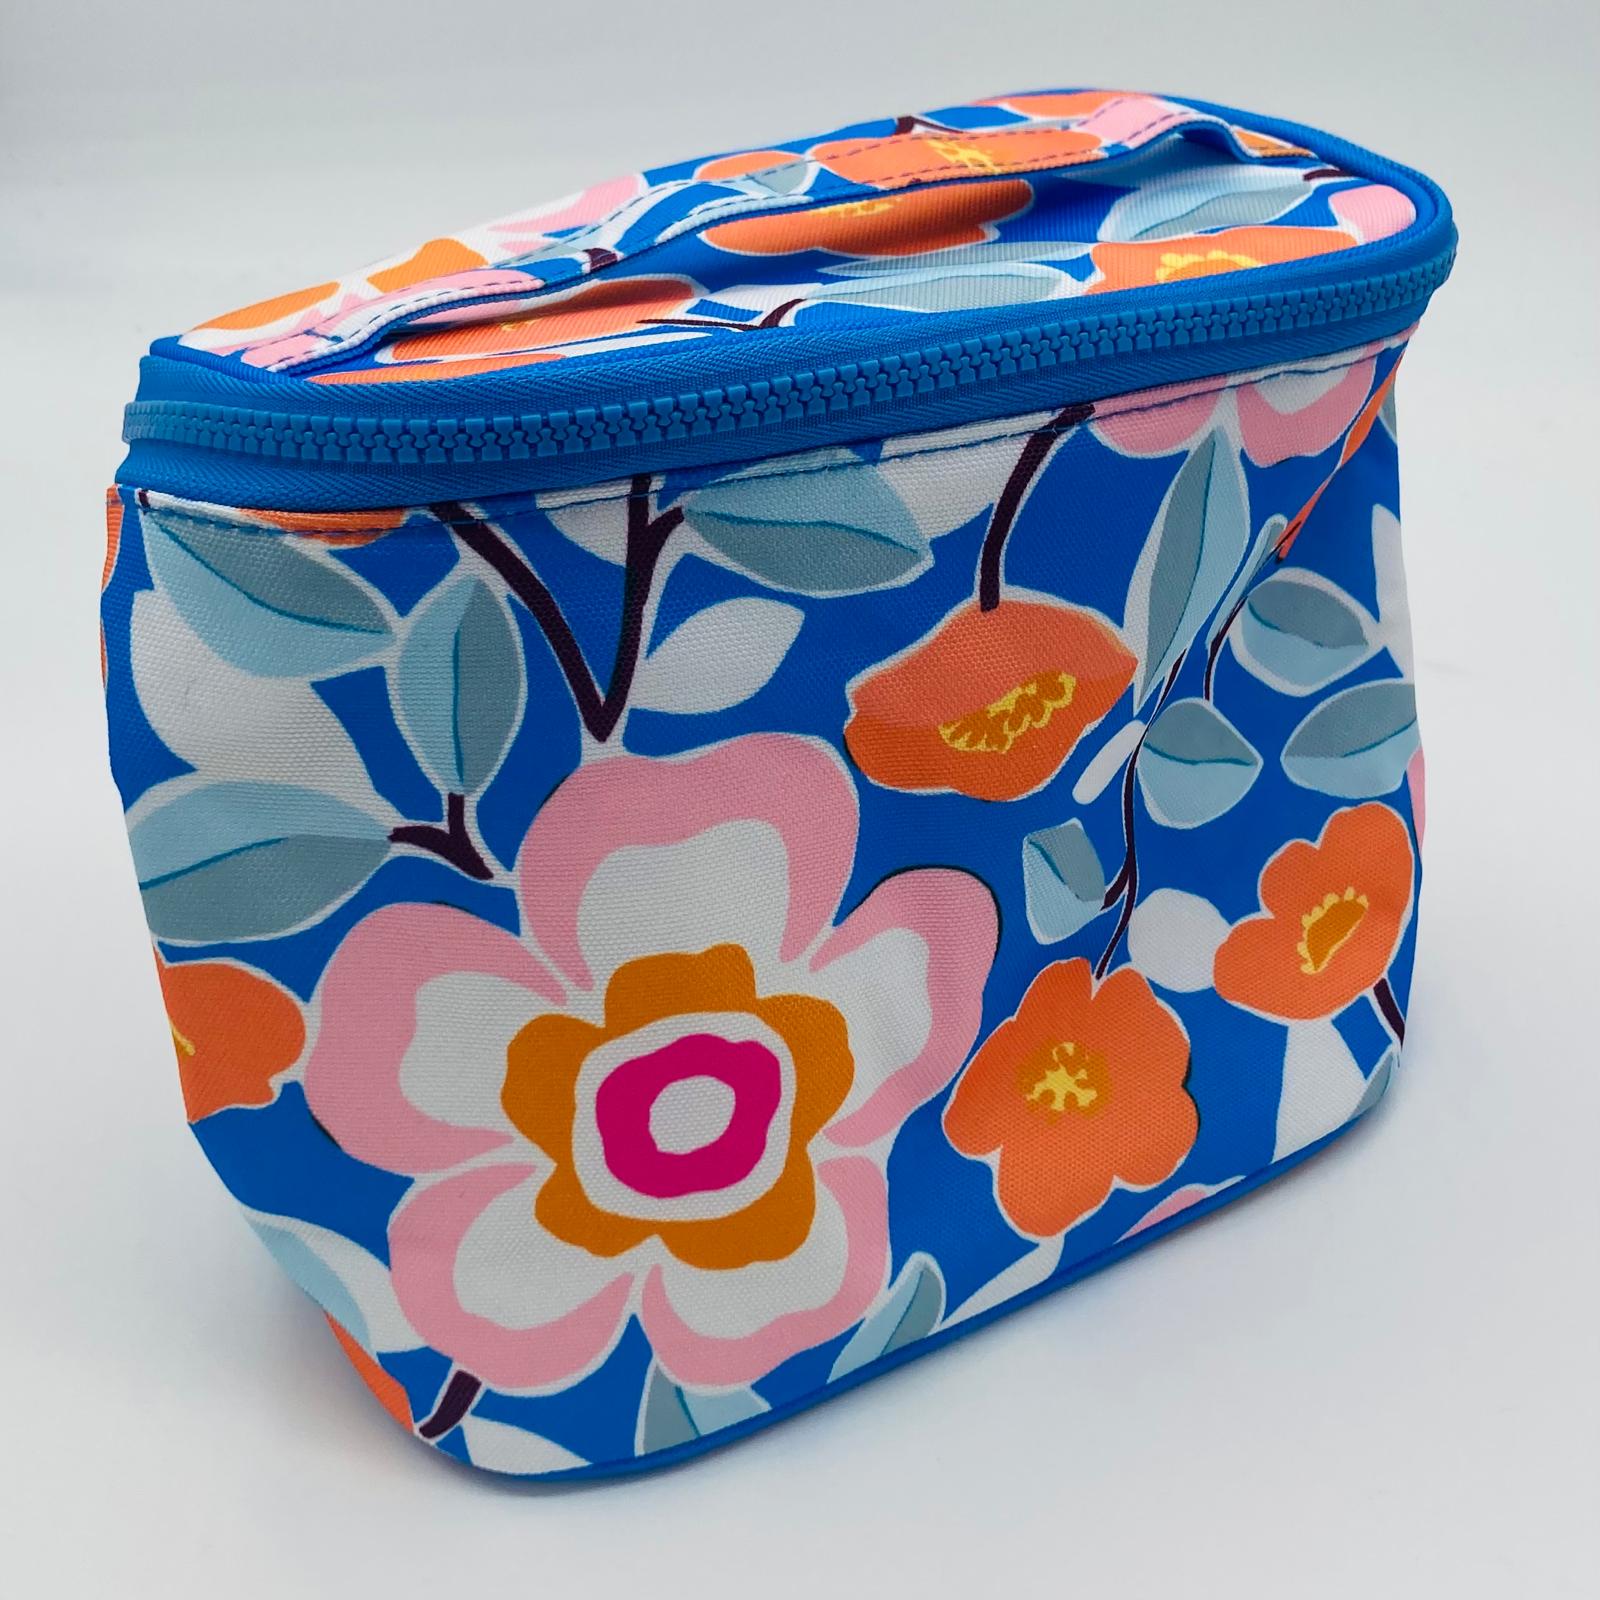 'Bright and Beautiful' (as new accessory box!)